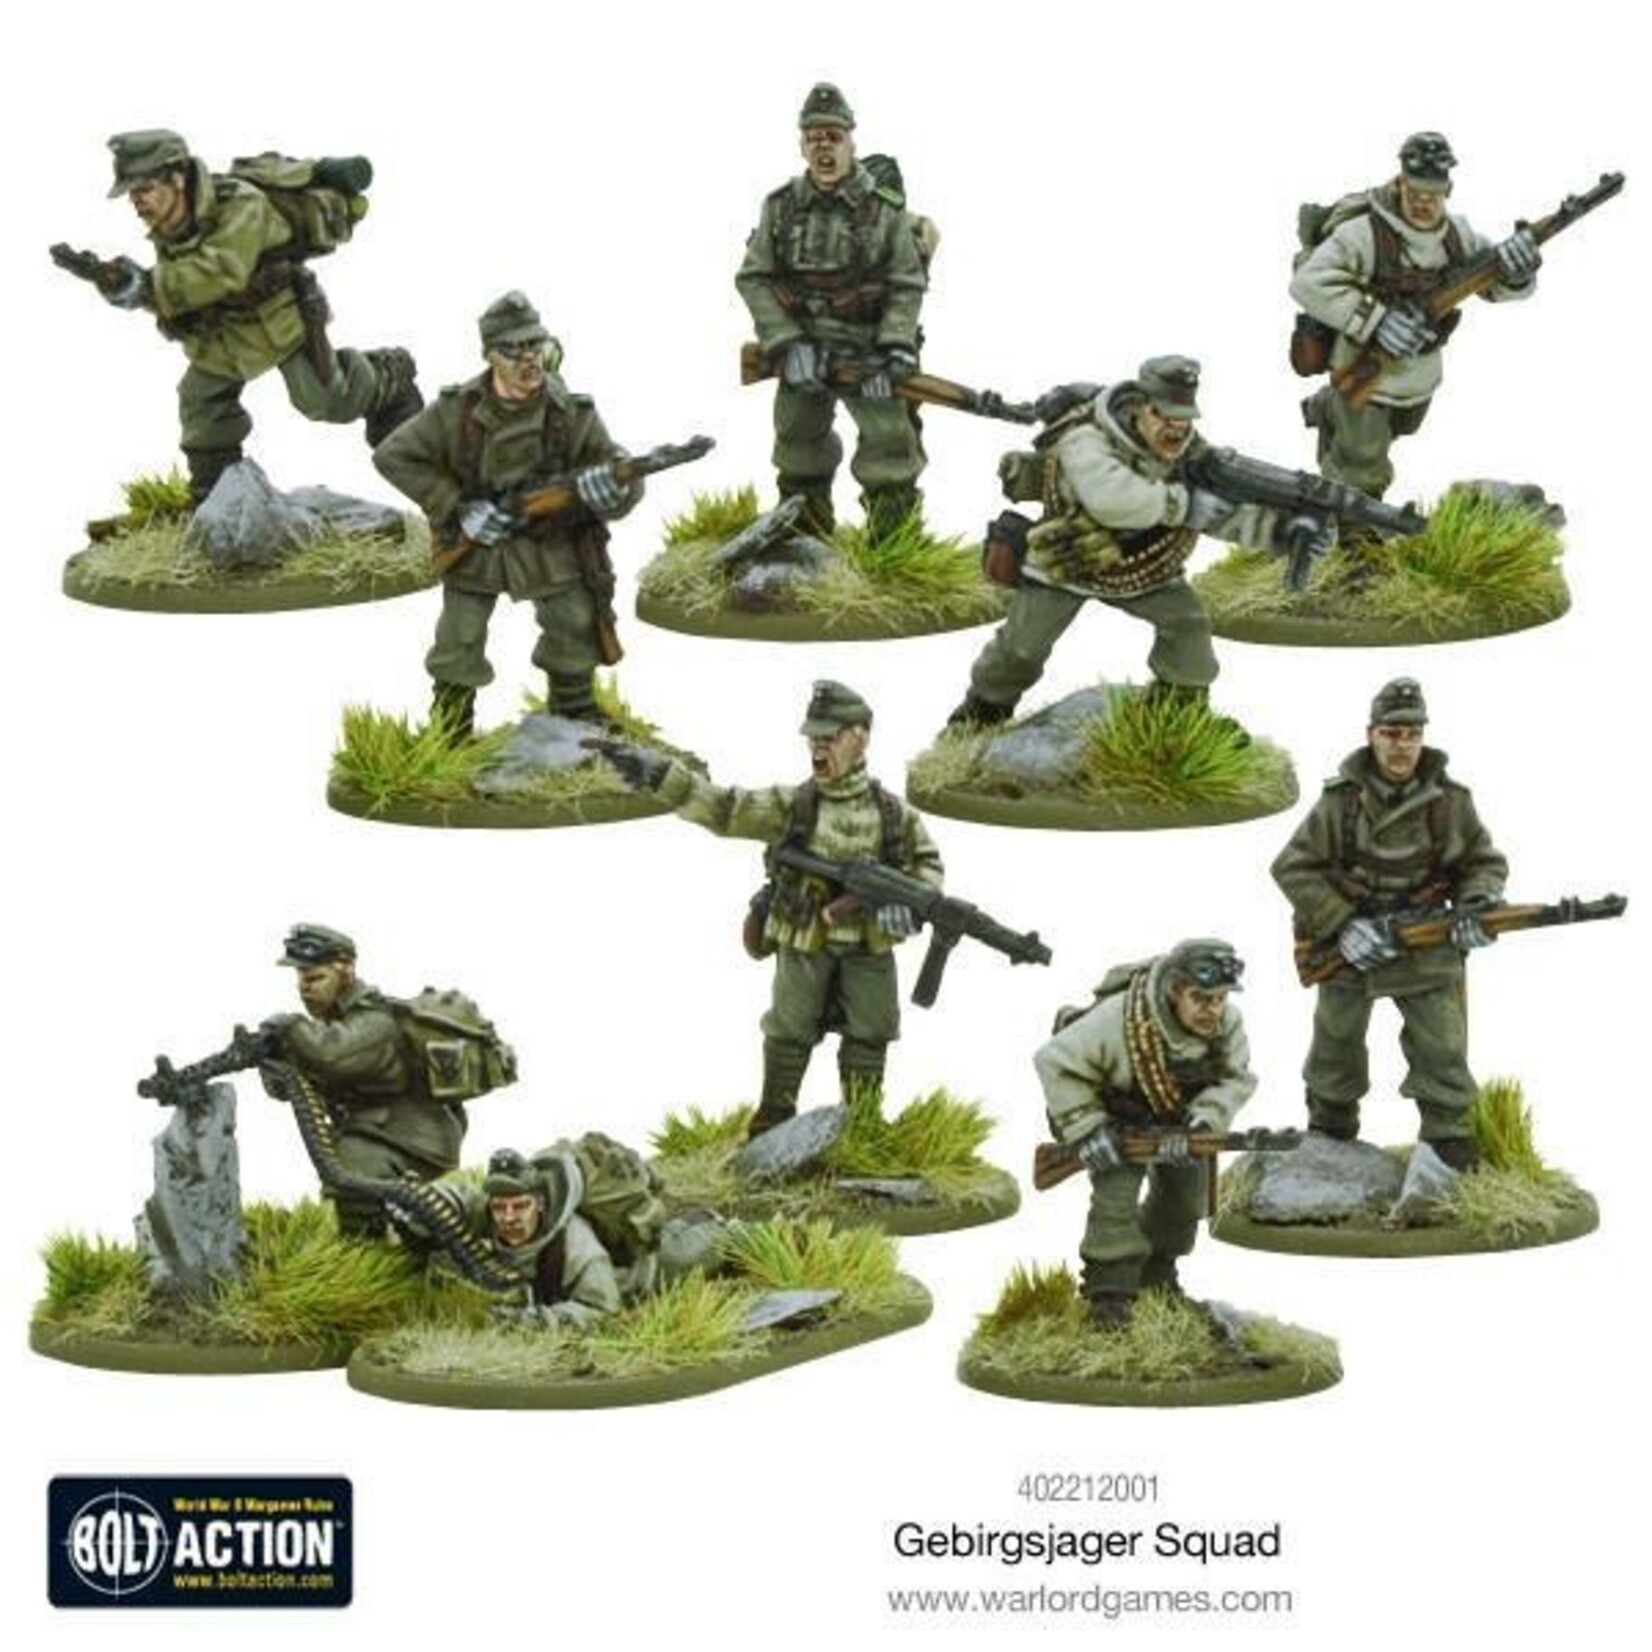 Gebirgsjager squad: German army - Bolt action